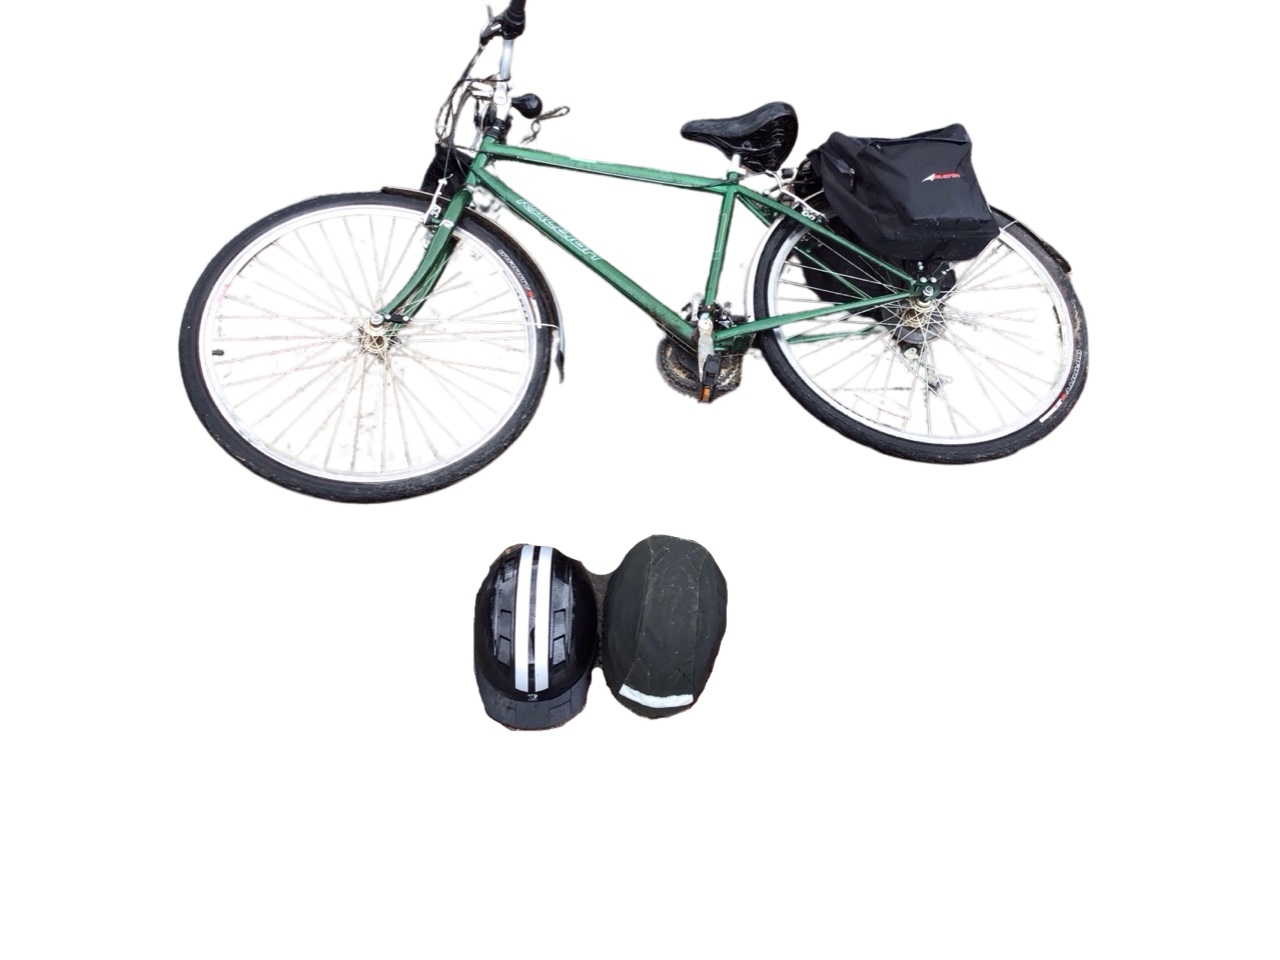 A Raleigh Oakland bicycle, with flat riser handlebars, Shimano gears, padded saddle, two helmets,